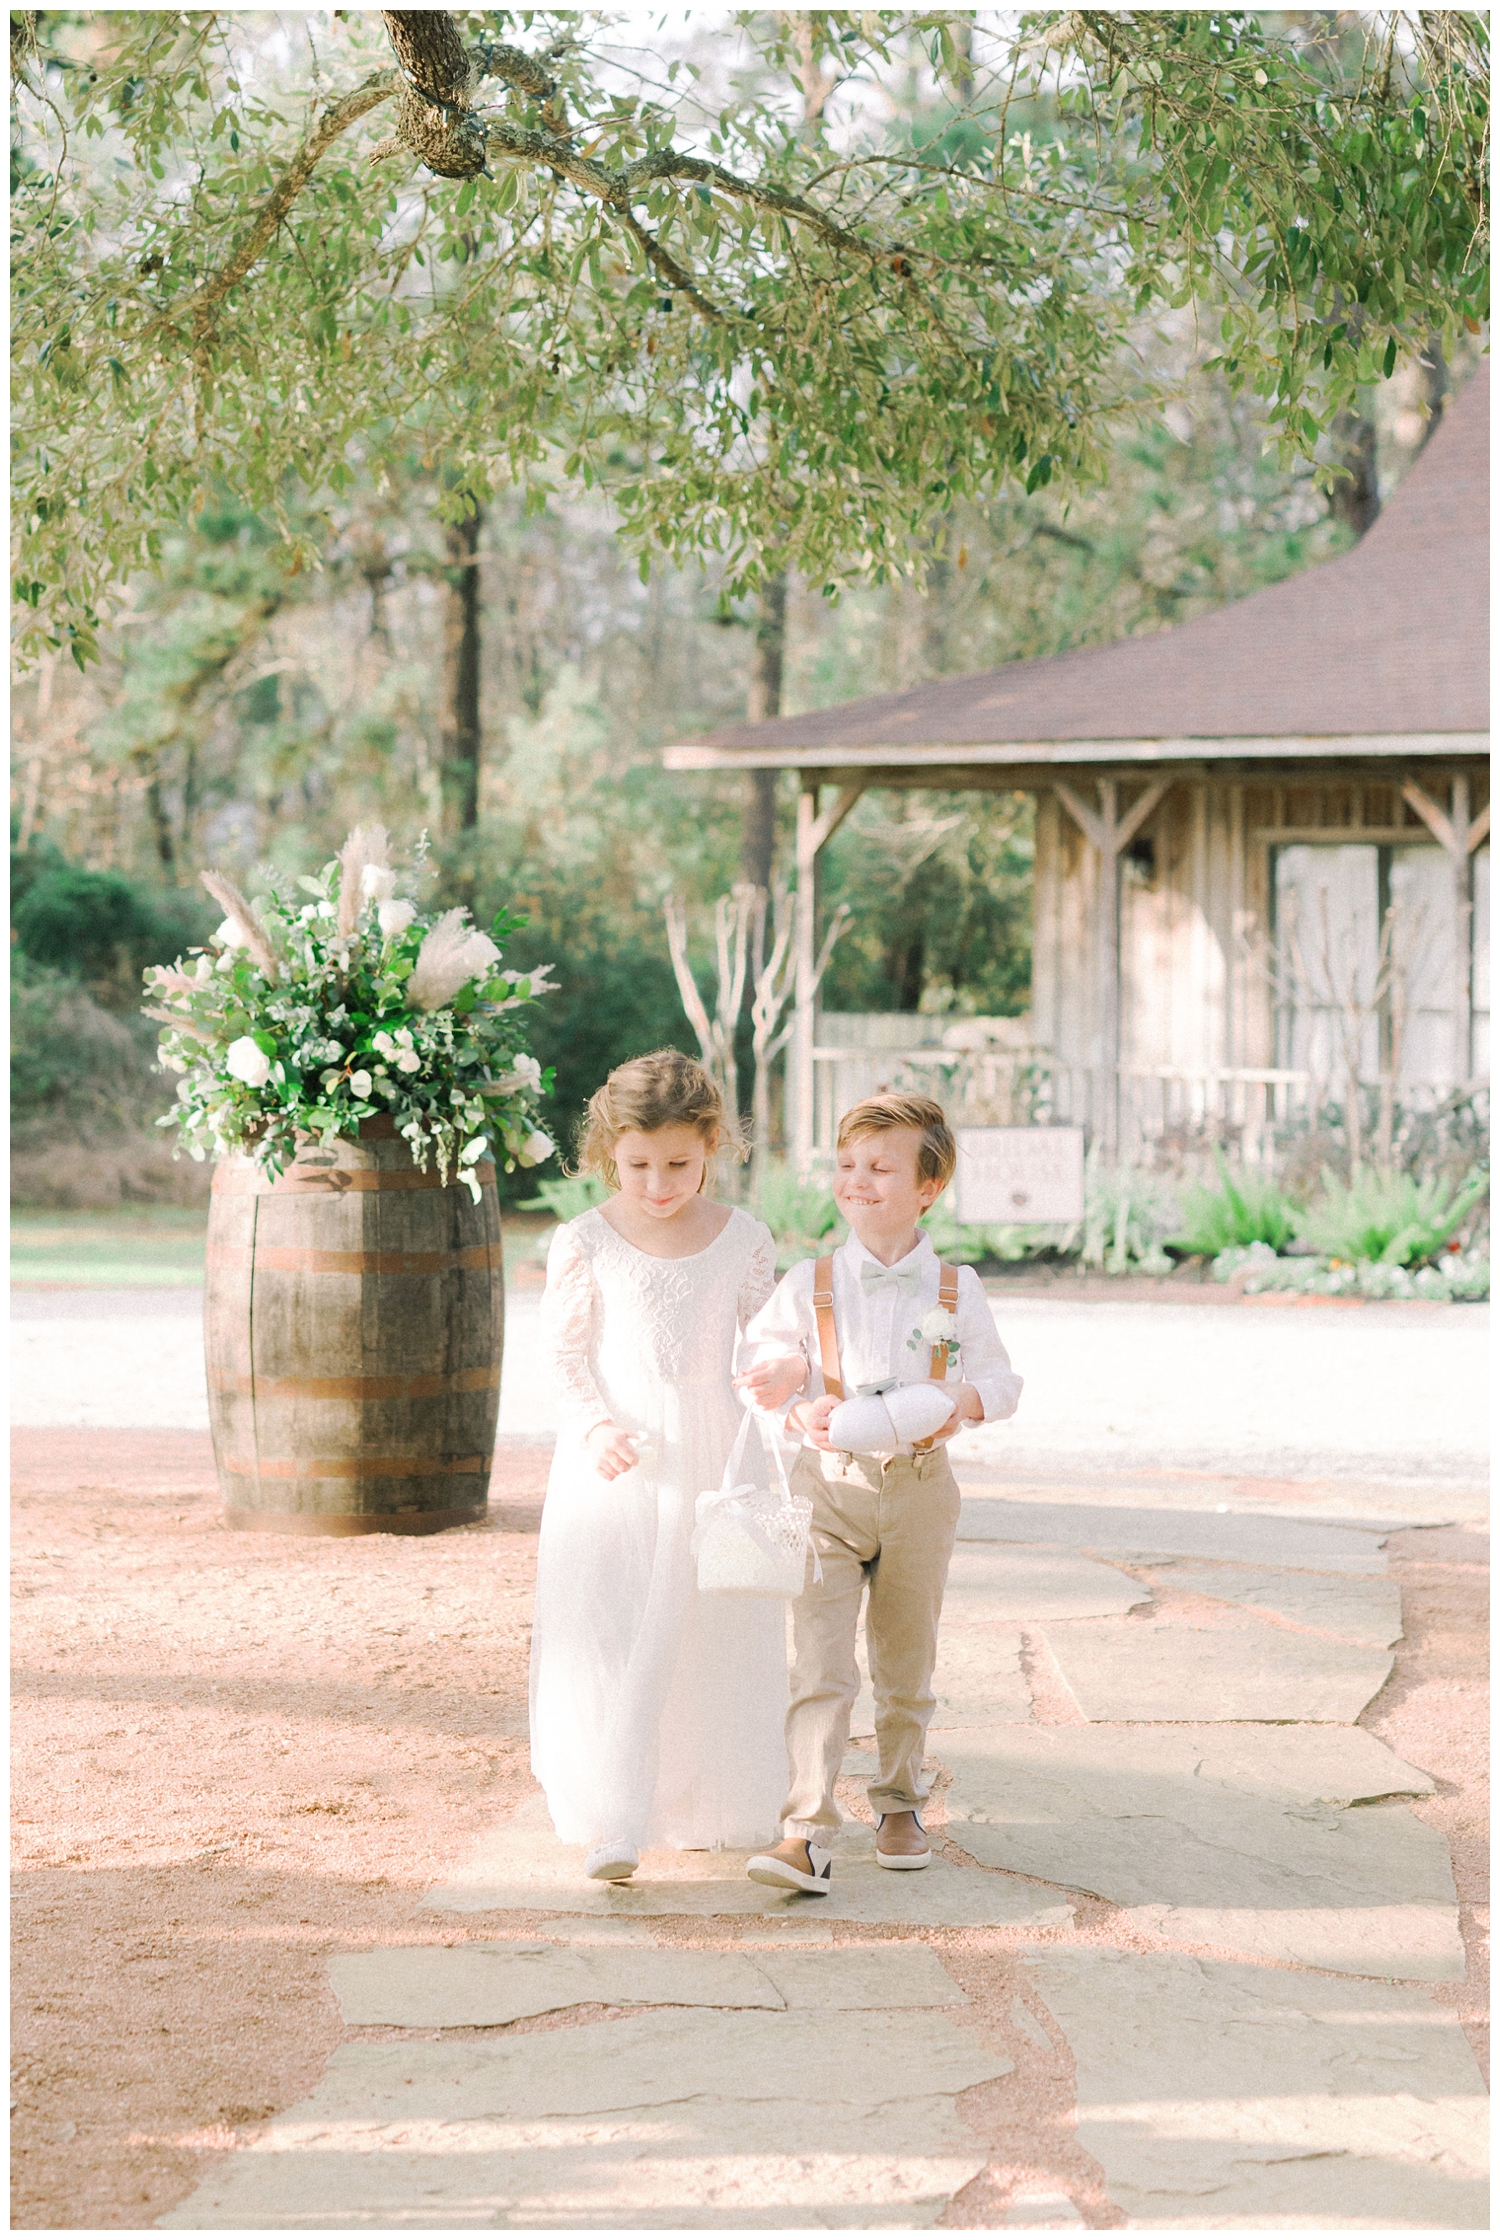 flower girl and ring bearer walking down the aisle at outdoor wedding